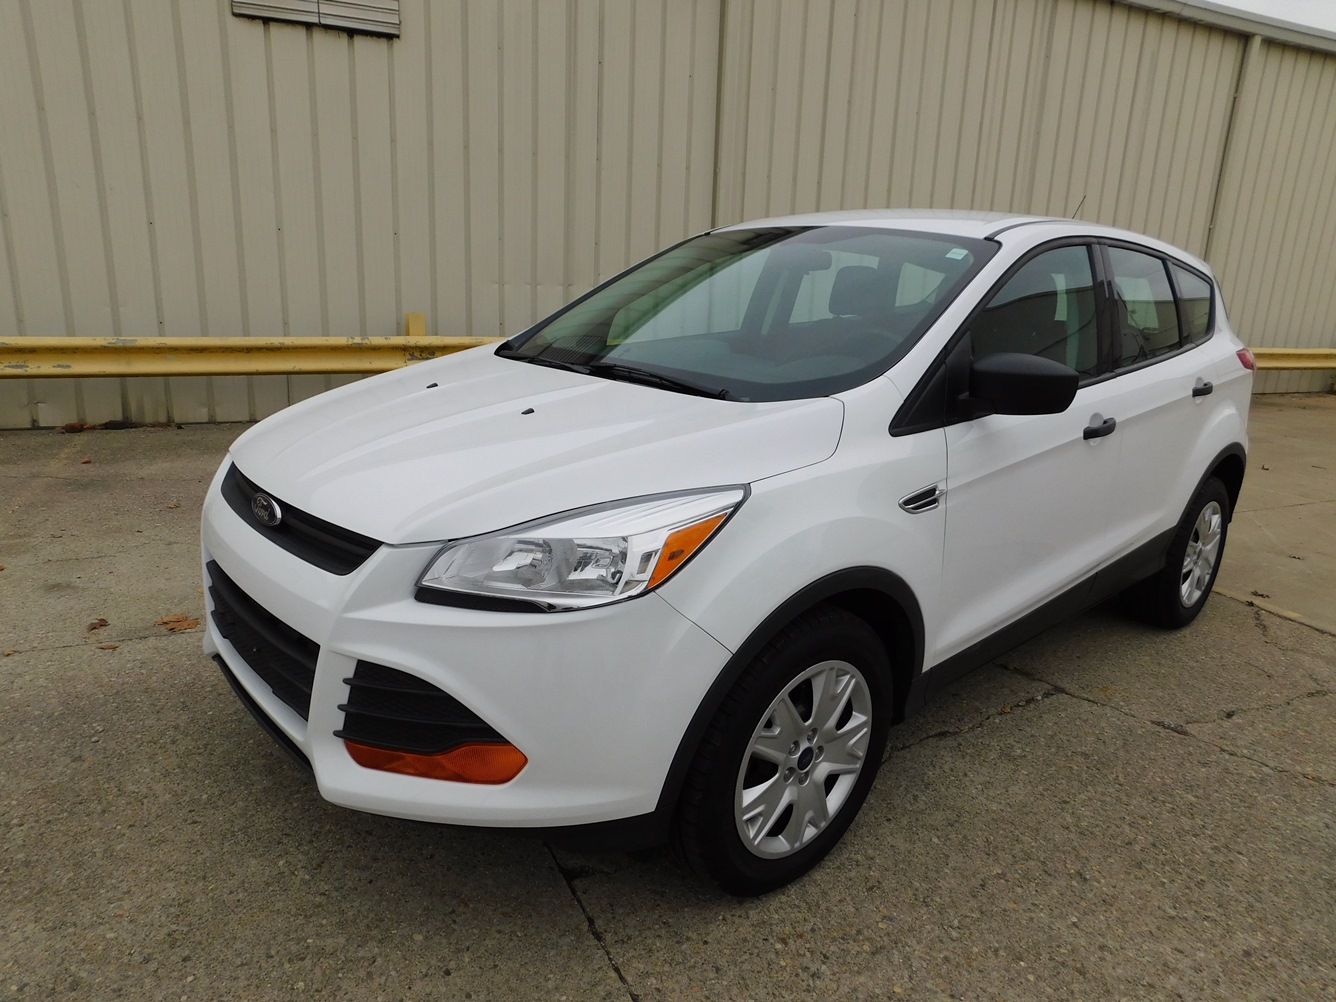 Front view of White and Black 2014 Ford Escape SUV featured at Goodwill Auto Auction